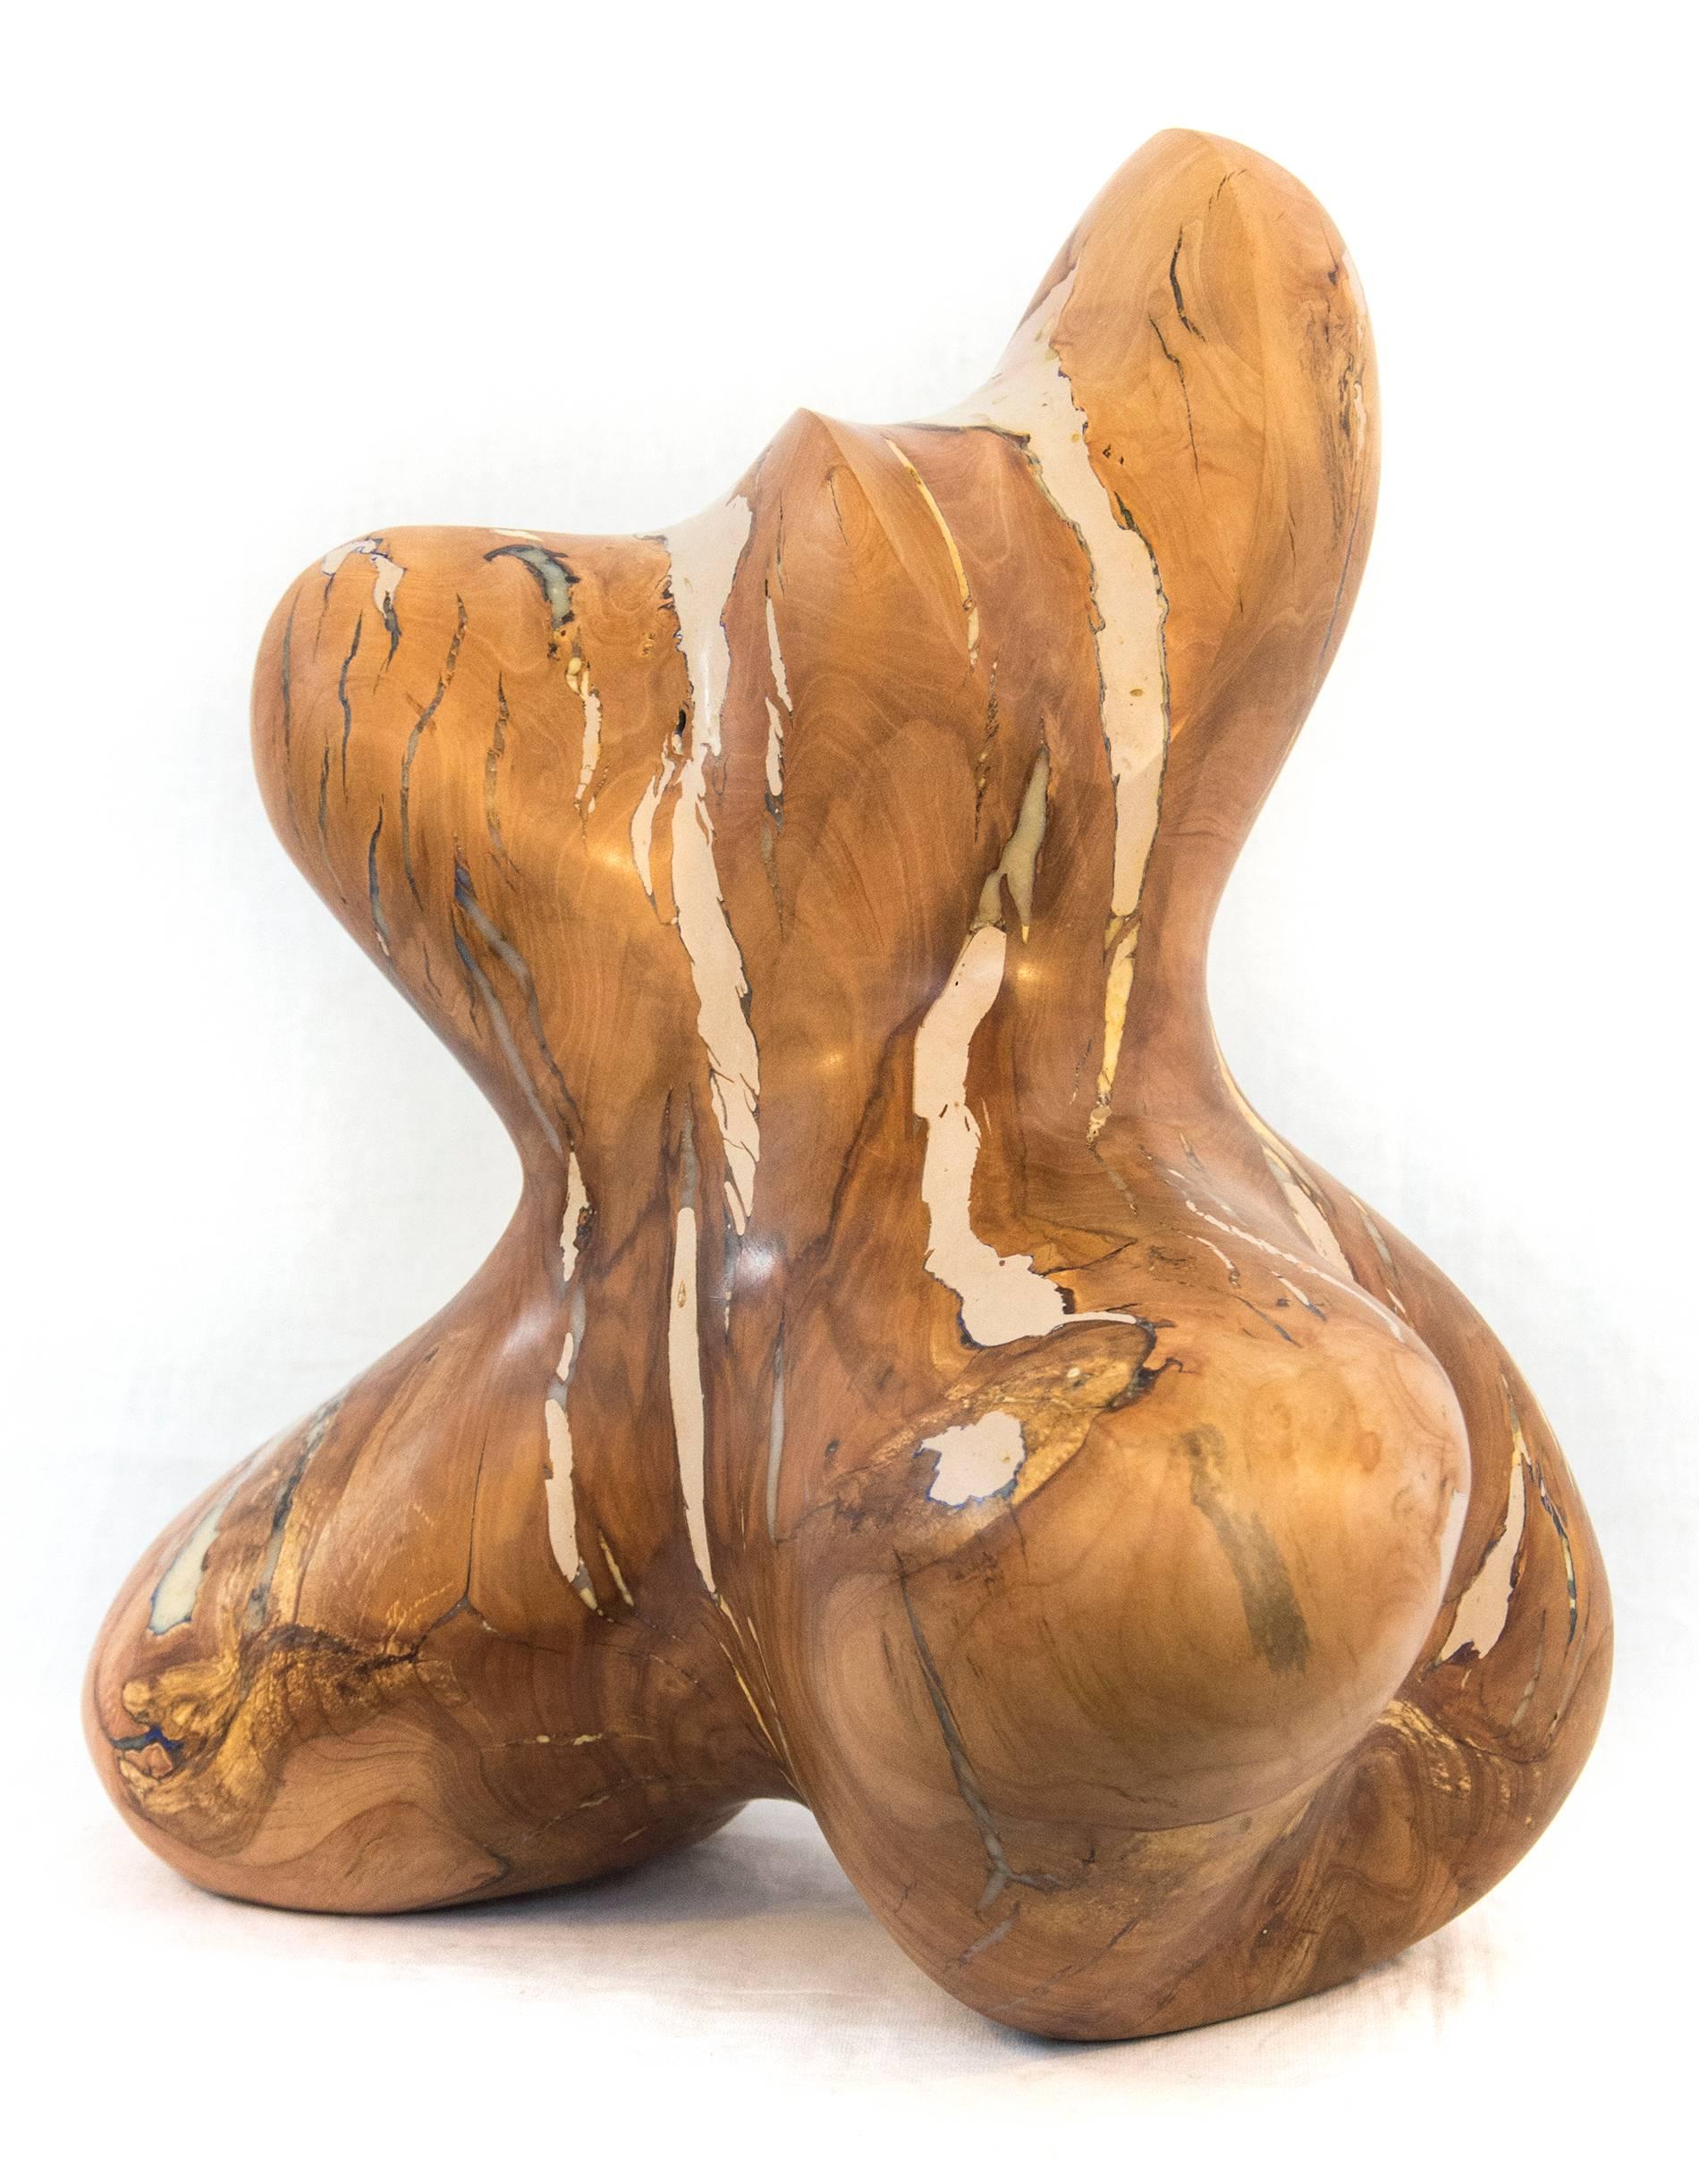 Windfall Series No 04 - small, smooth, abstract, natural wood carved sculpture